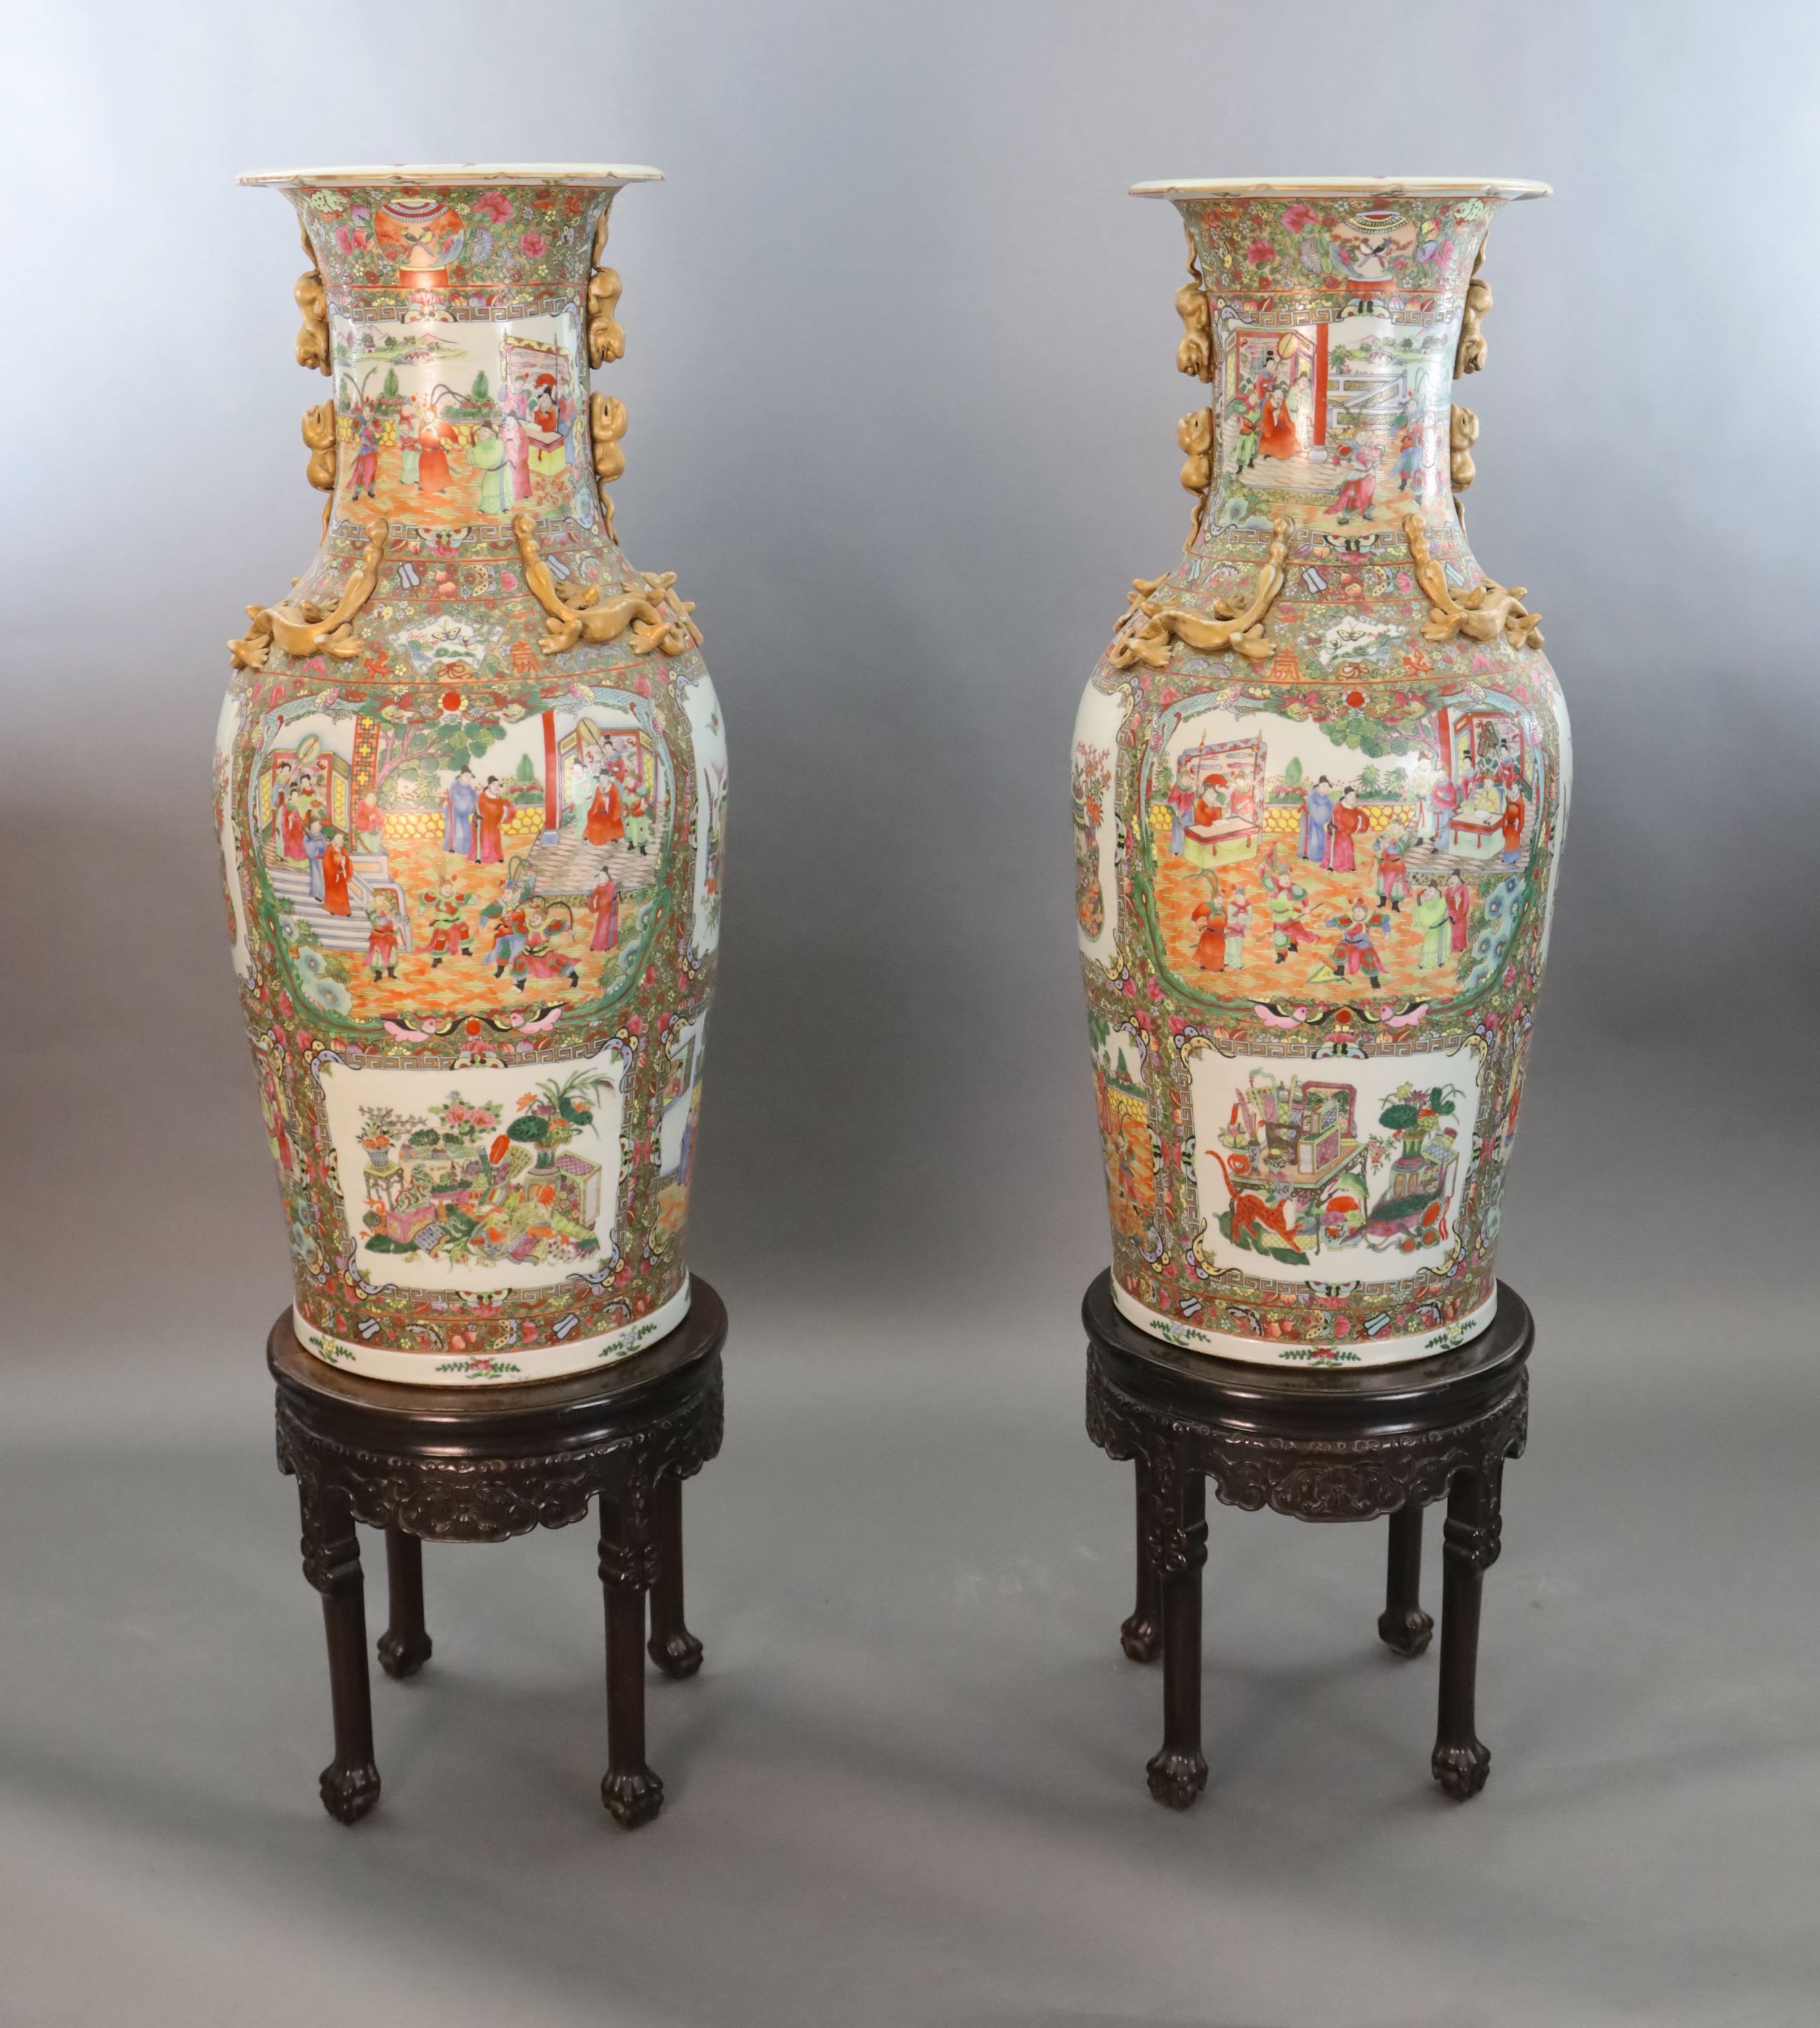 A pair of massive Chinese Canton style famille rose vases, 20th century and a pair of Chinese hongmu and marble stands, late 19th century